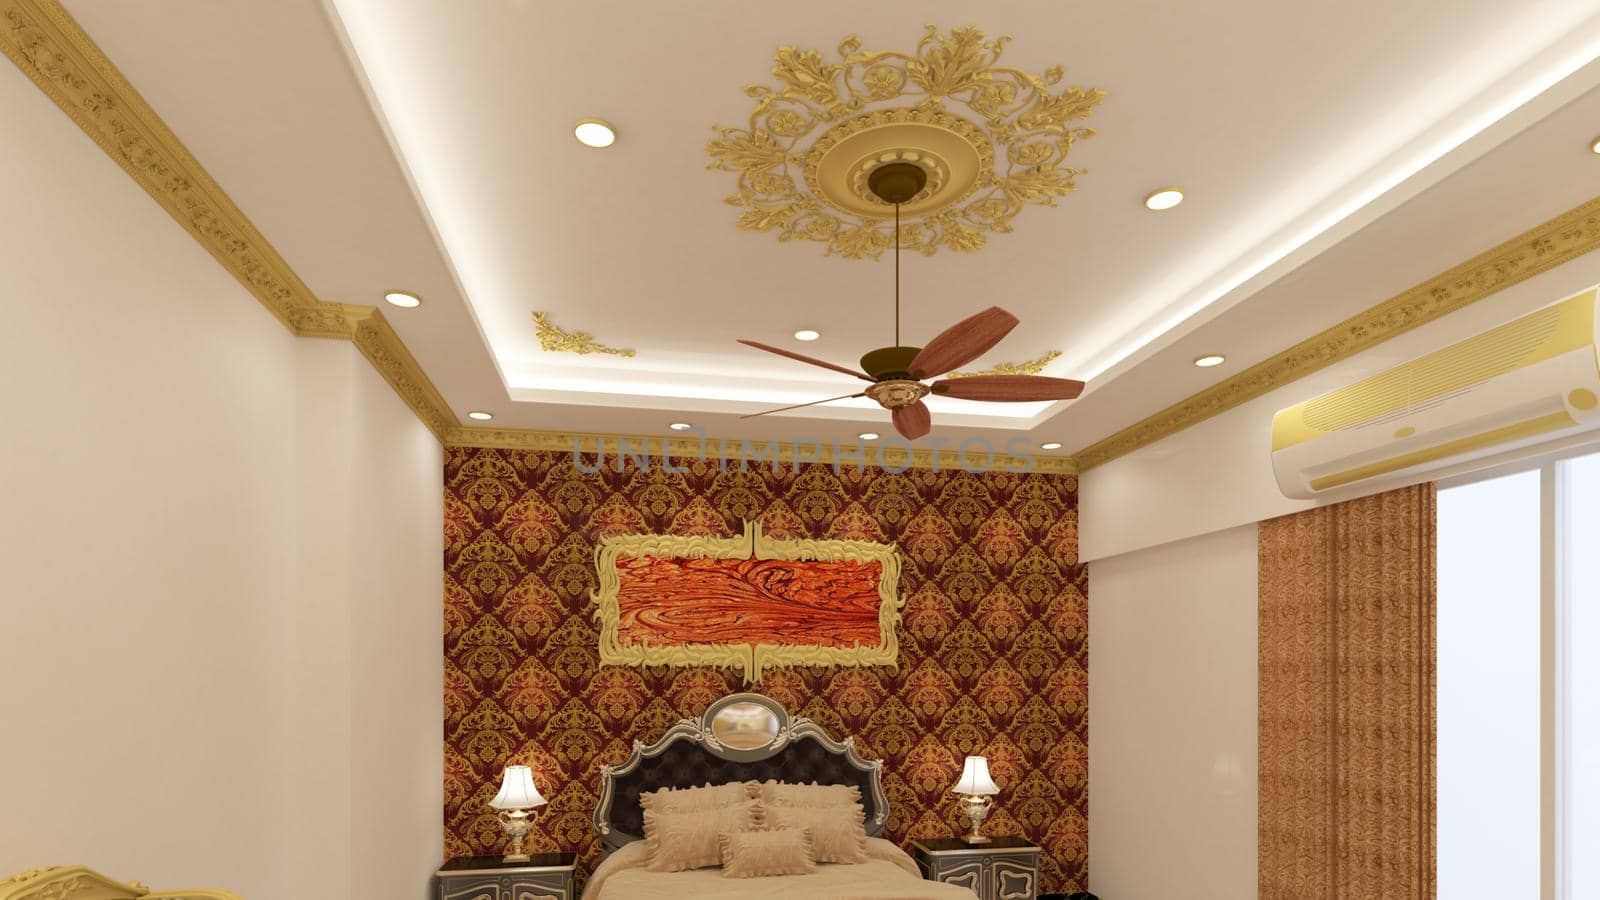 3d render Illustration classic style bedroom ceiling. white, red and gold color theme classic combinations.